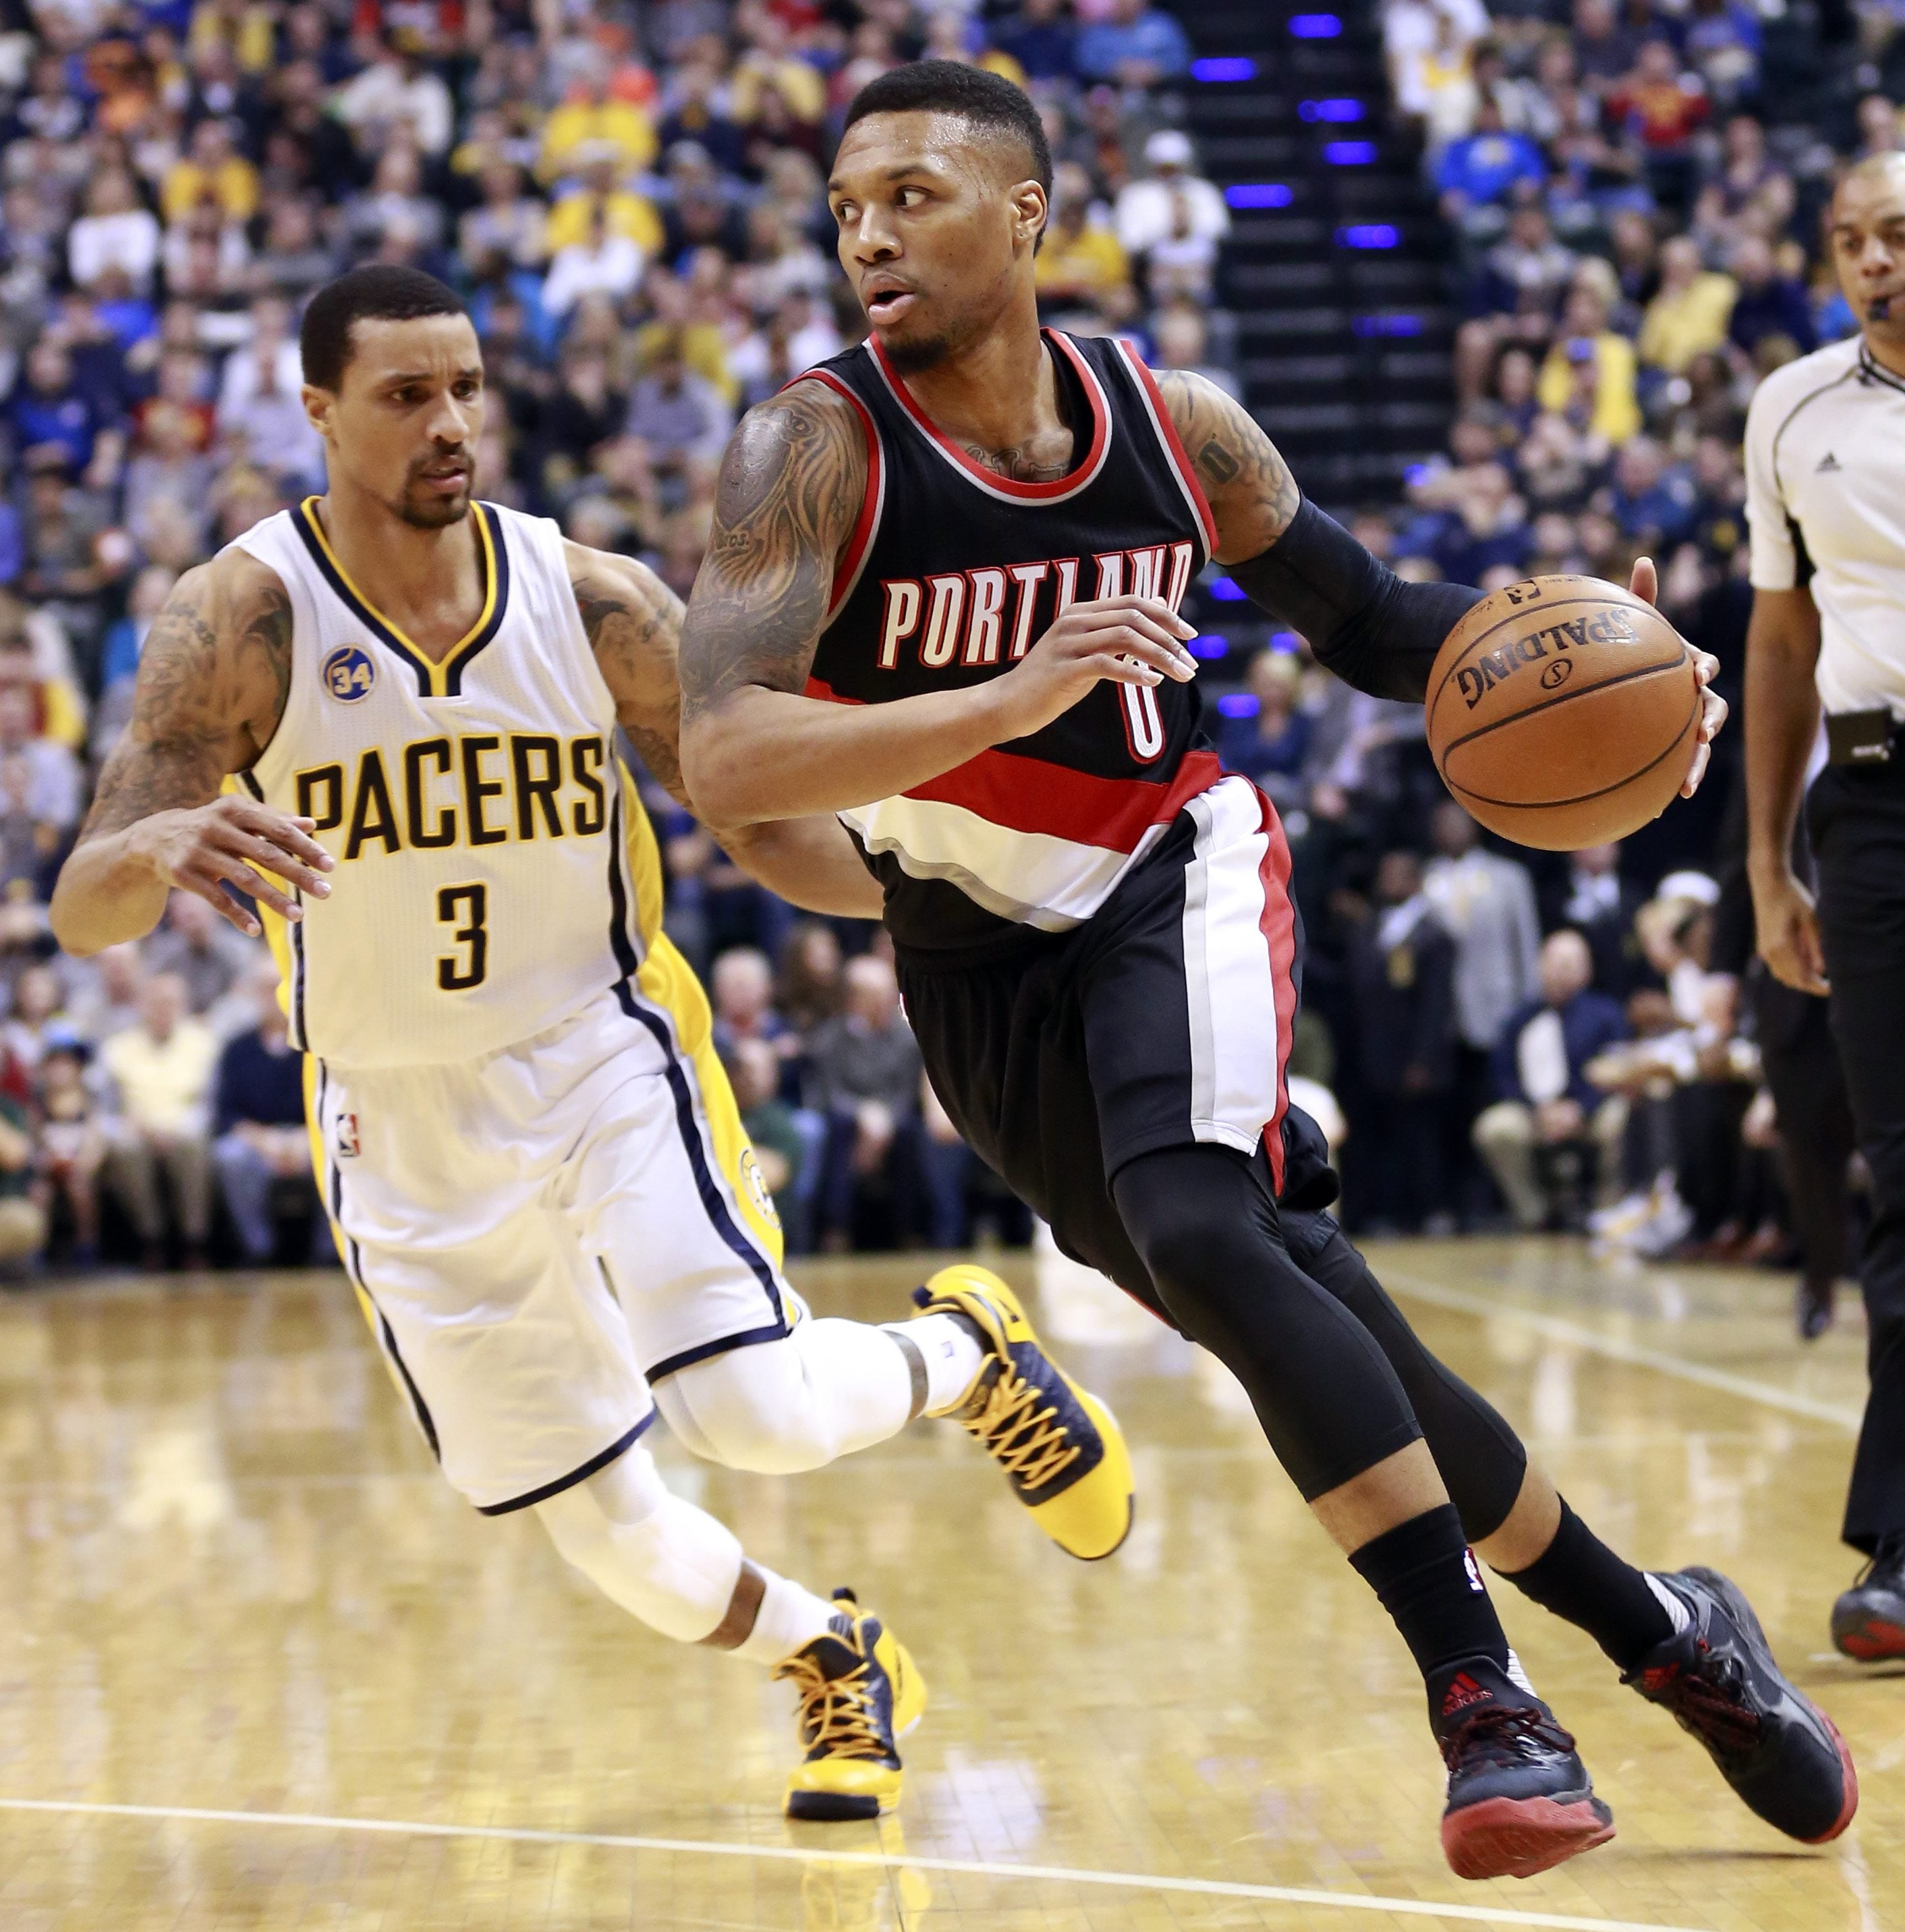 Portland Trail Blazers guard Damian Lillard, right, gets past Indiana Pacers guard George Hill (3) in the first half of an NBA basketball game, Sunday, Feb. 28, 2016, in Indianapolis.